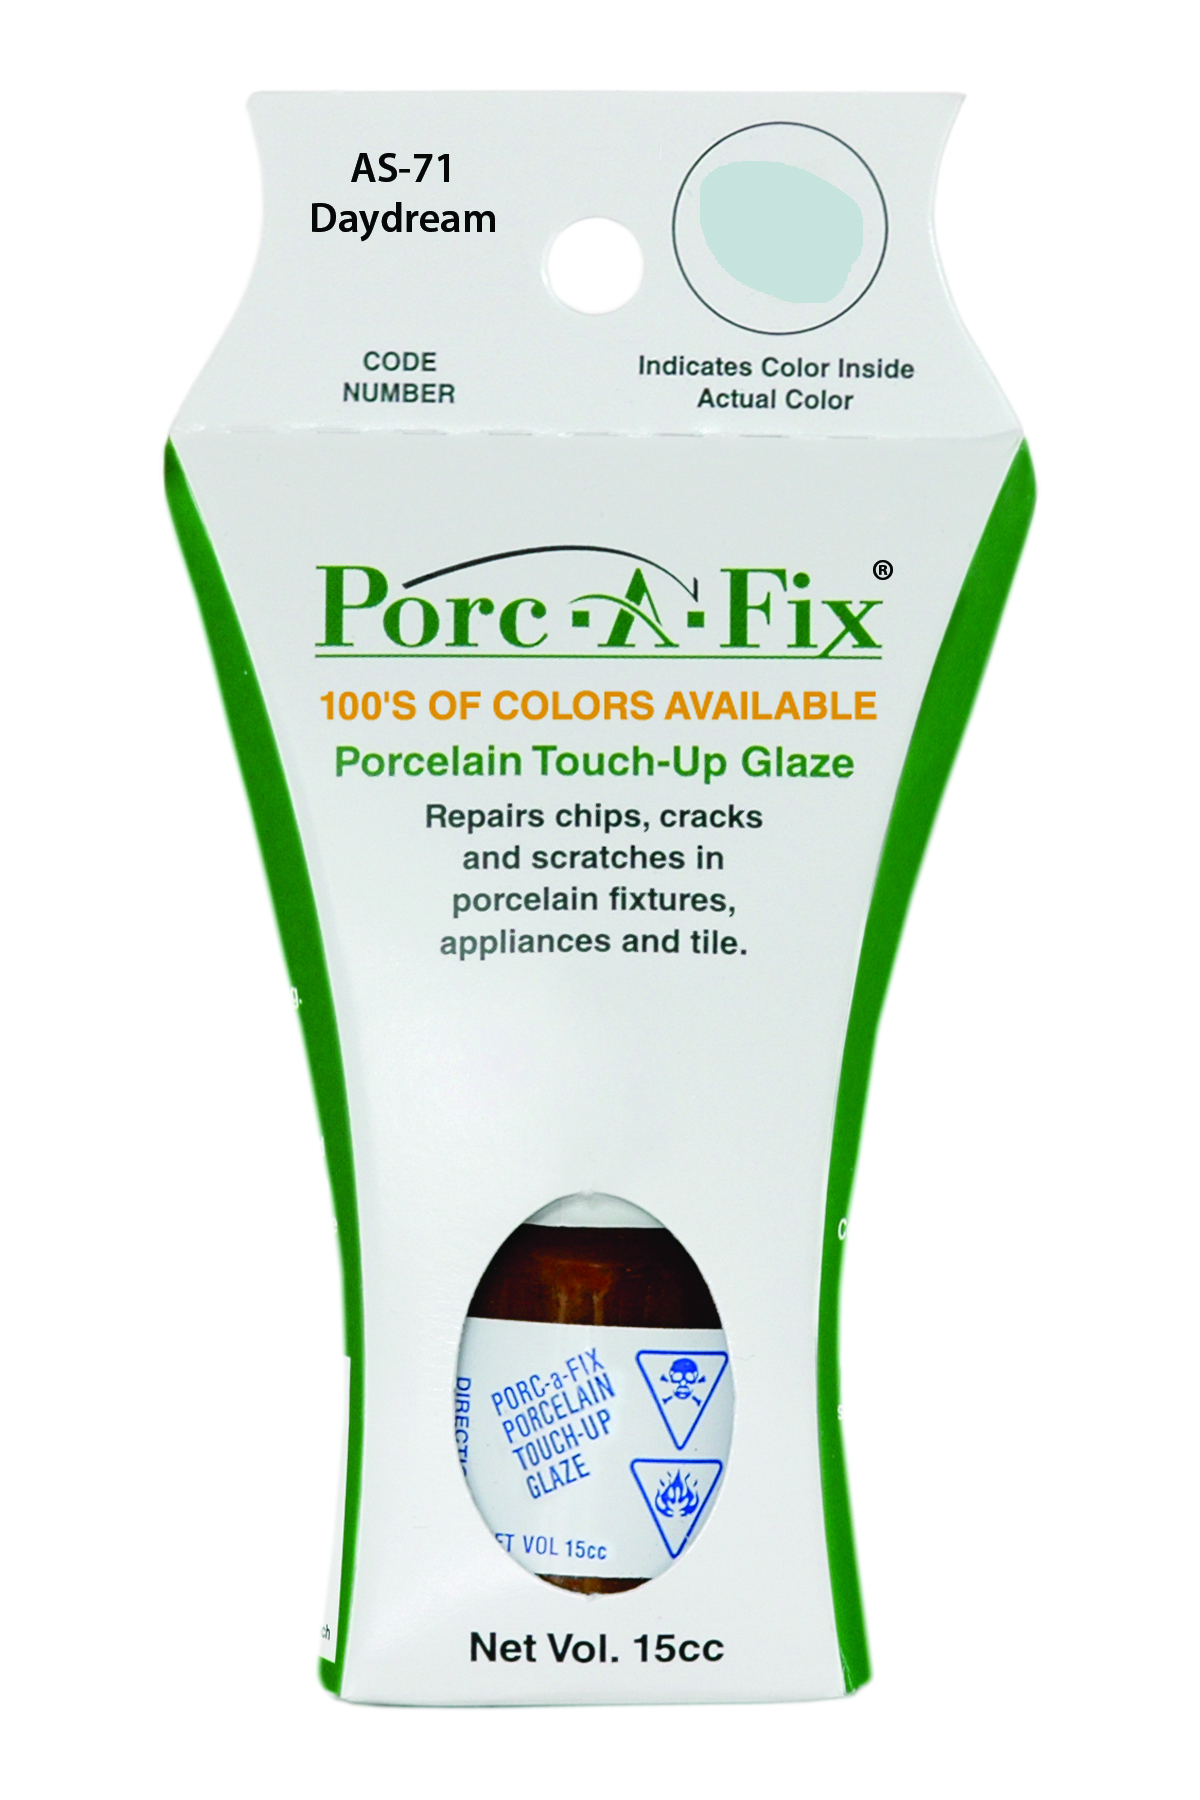 Fixture-Fix | AS-71 | Porc-A-Fix Touch-Up Glaze American Standard Daydream - Compatible with American Standard 070900-2250A Touch Up Paint Kit - DAYDREAM